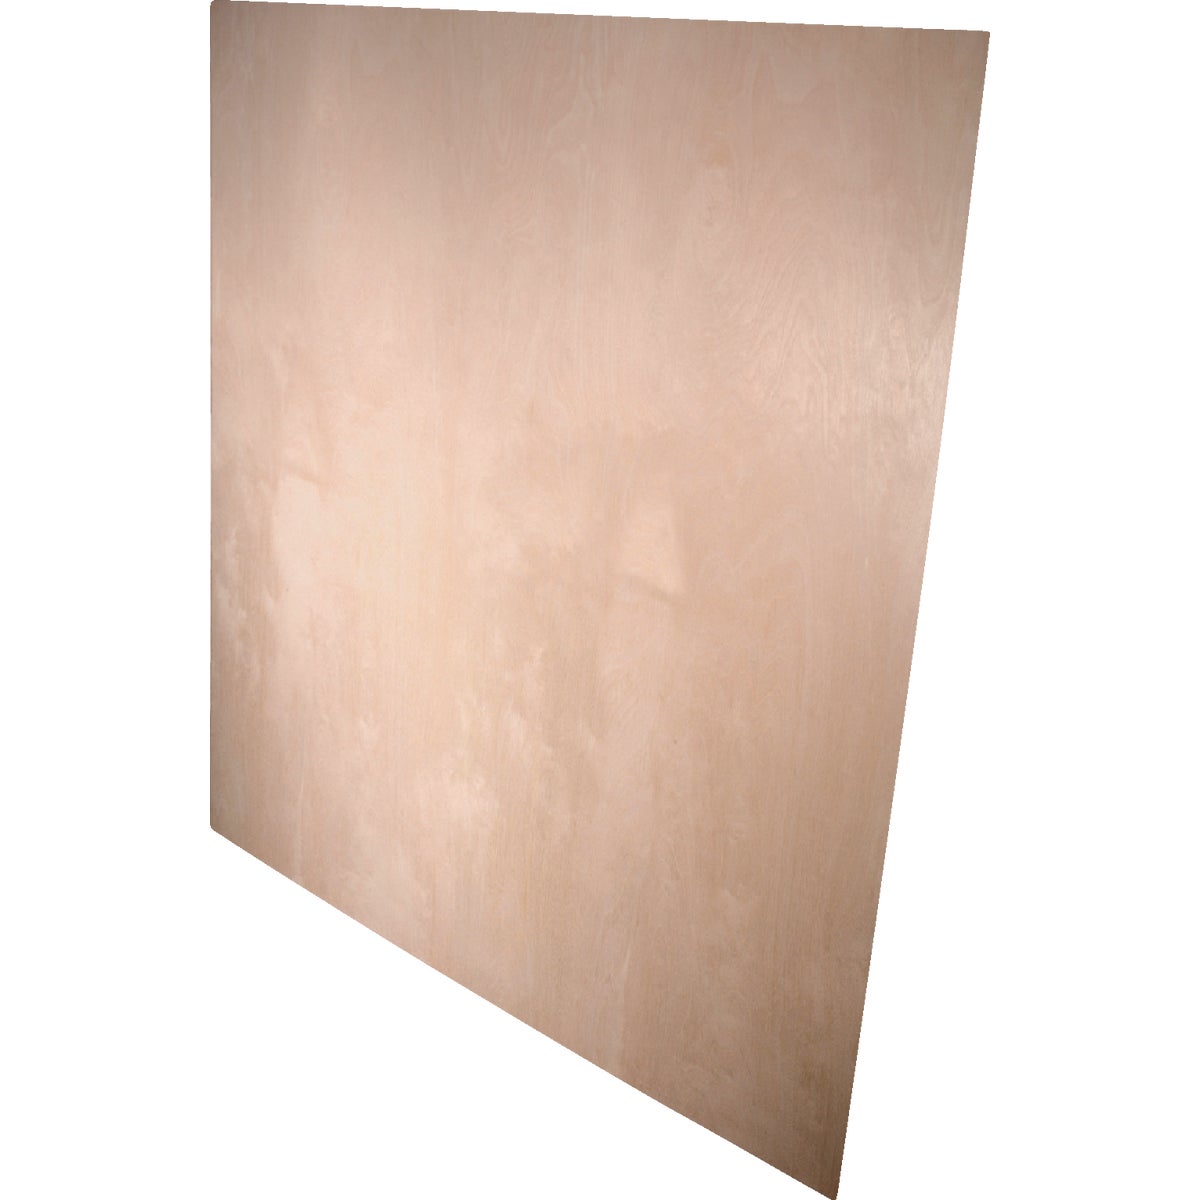 Alexandria Moulding 1/2 In. x 48 In. x 48 In. Pine Plywood